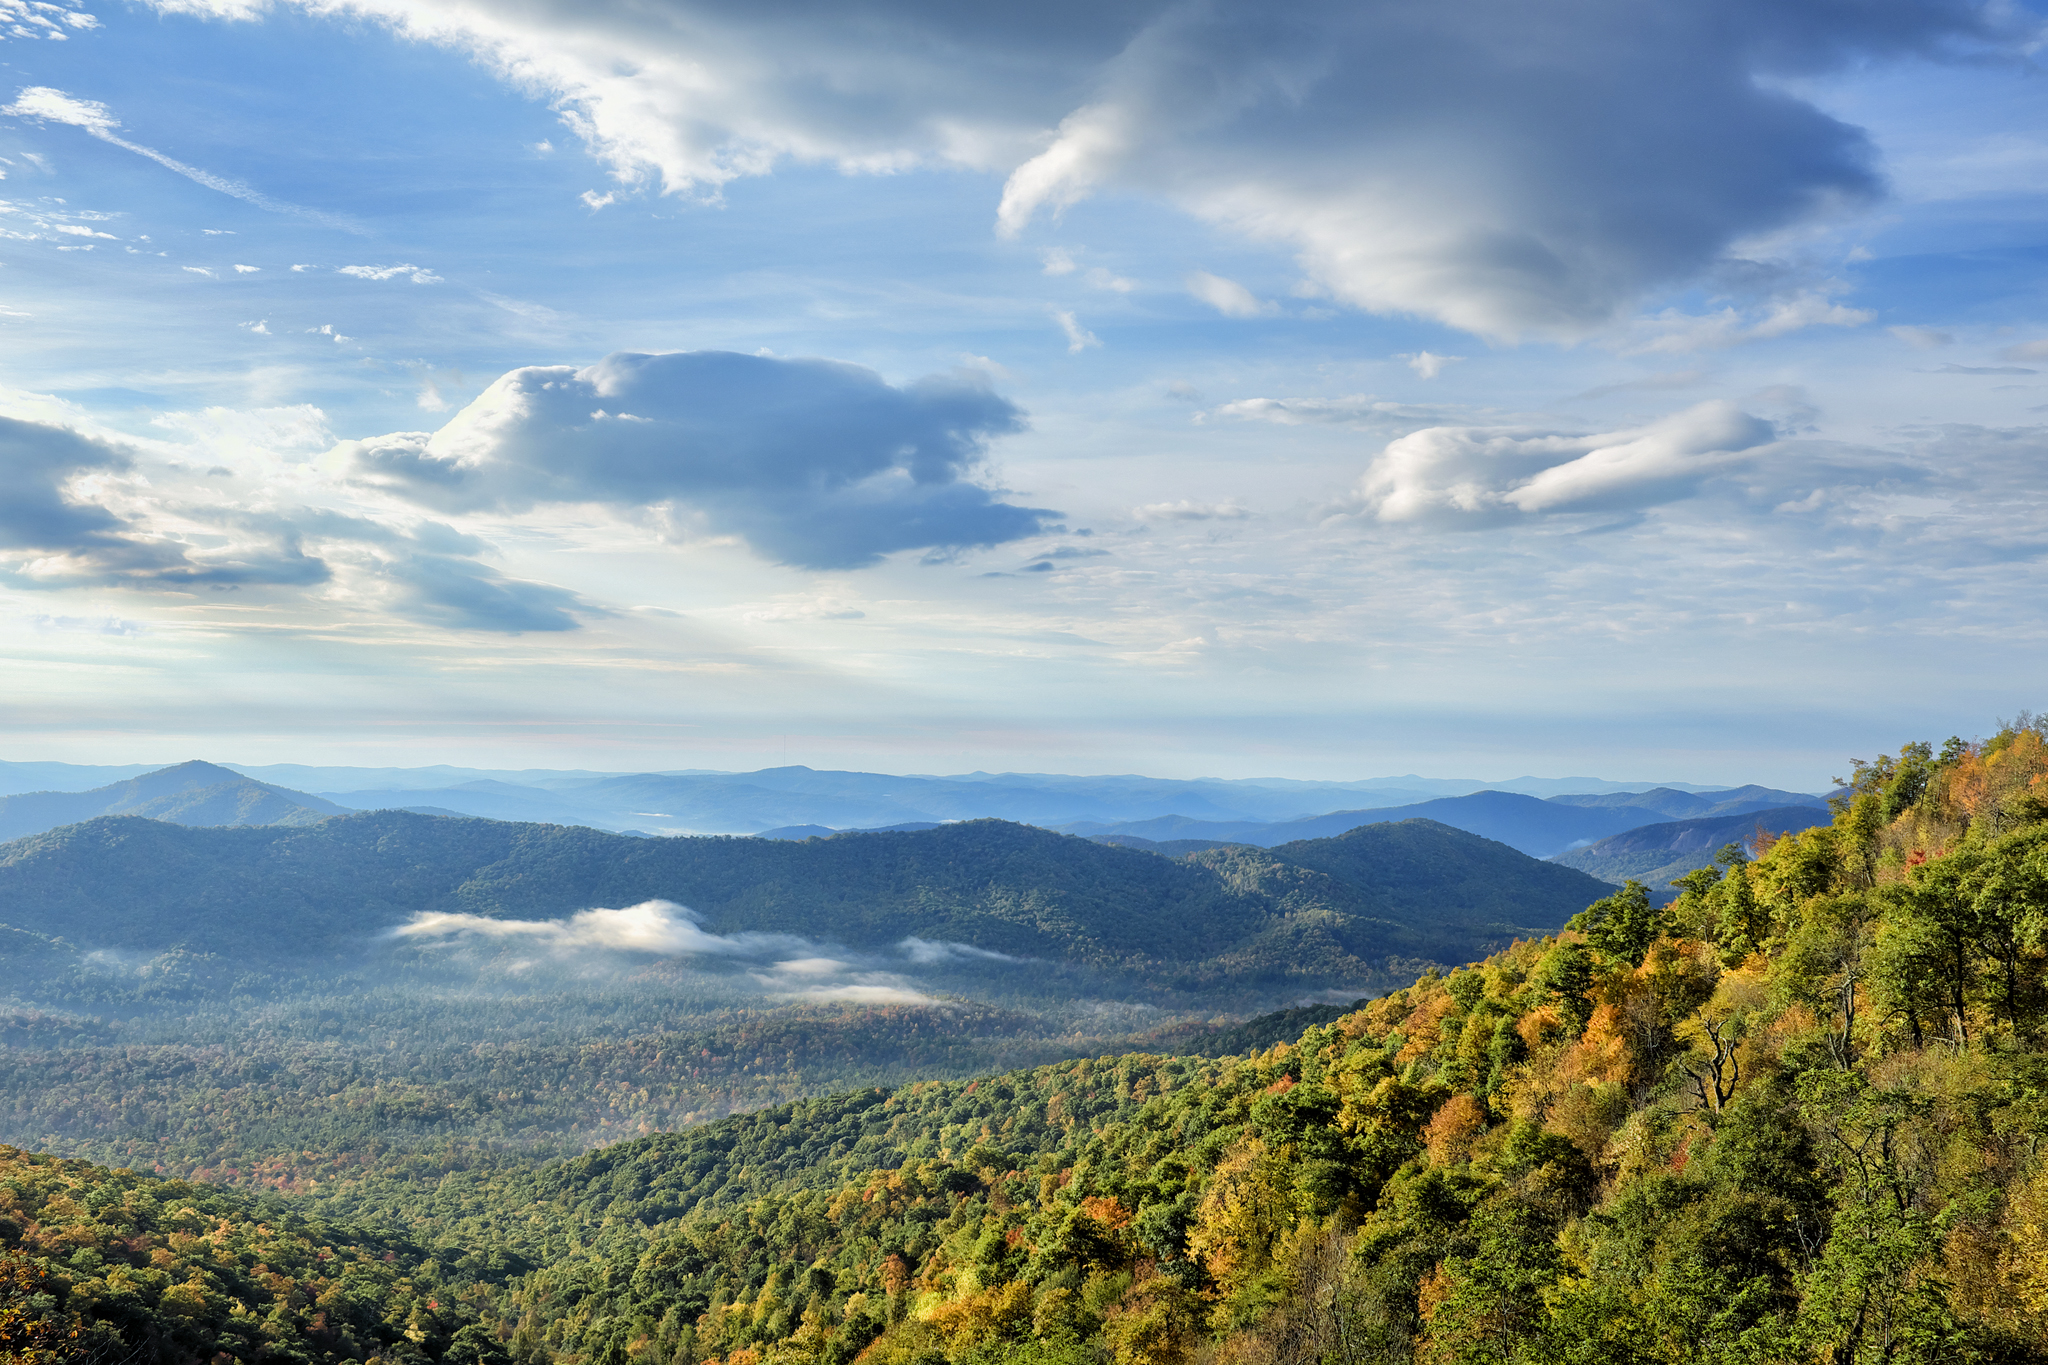 Mountain vista and clouds on the Blue Ridge Parkway